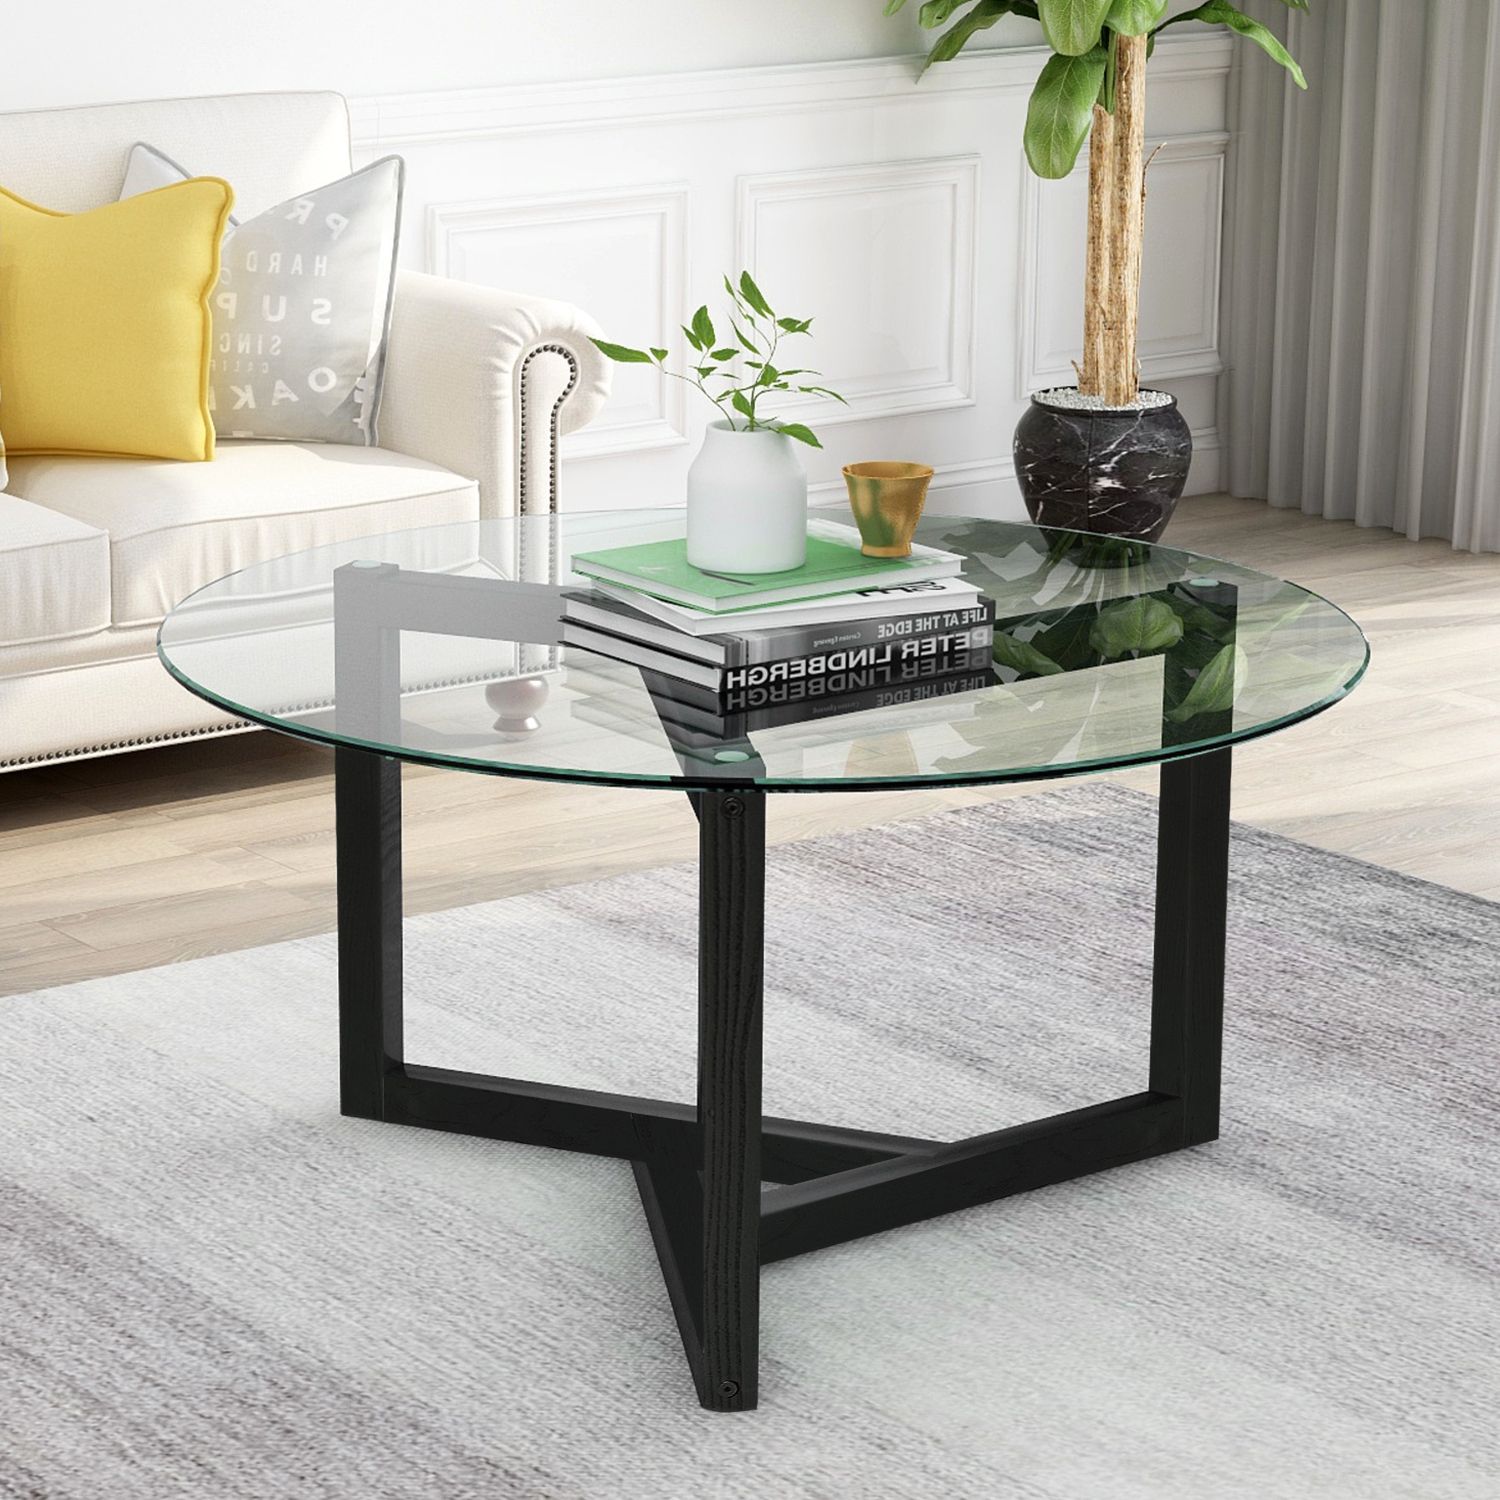 Newest Akoyovwerve Round Glass Coffee Table Modern Cocktail Table Intended For Geometric Glass Modern Console Tables (View 8 of 10)